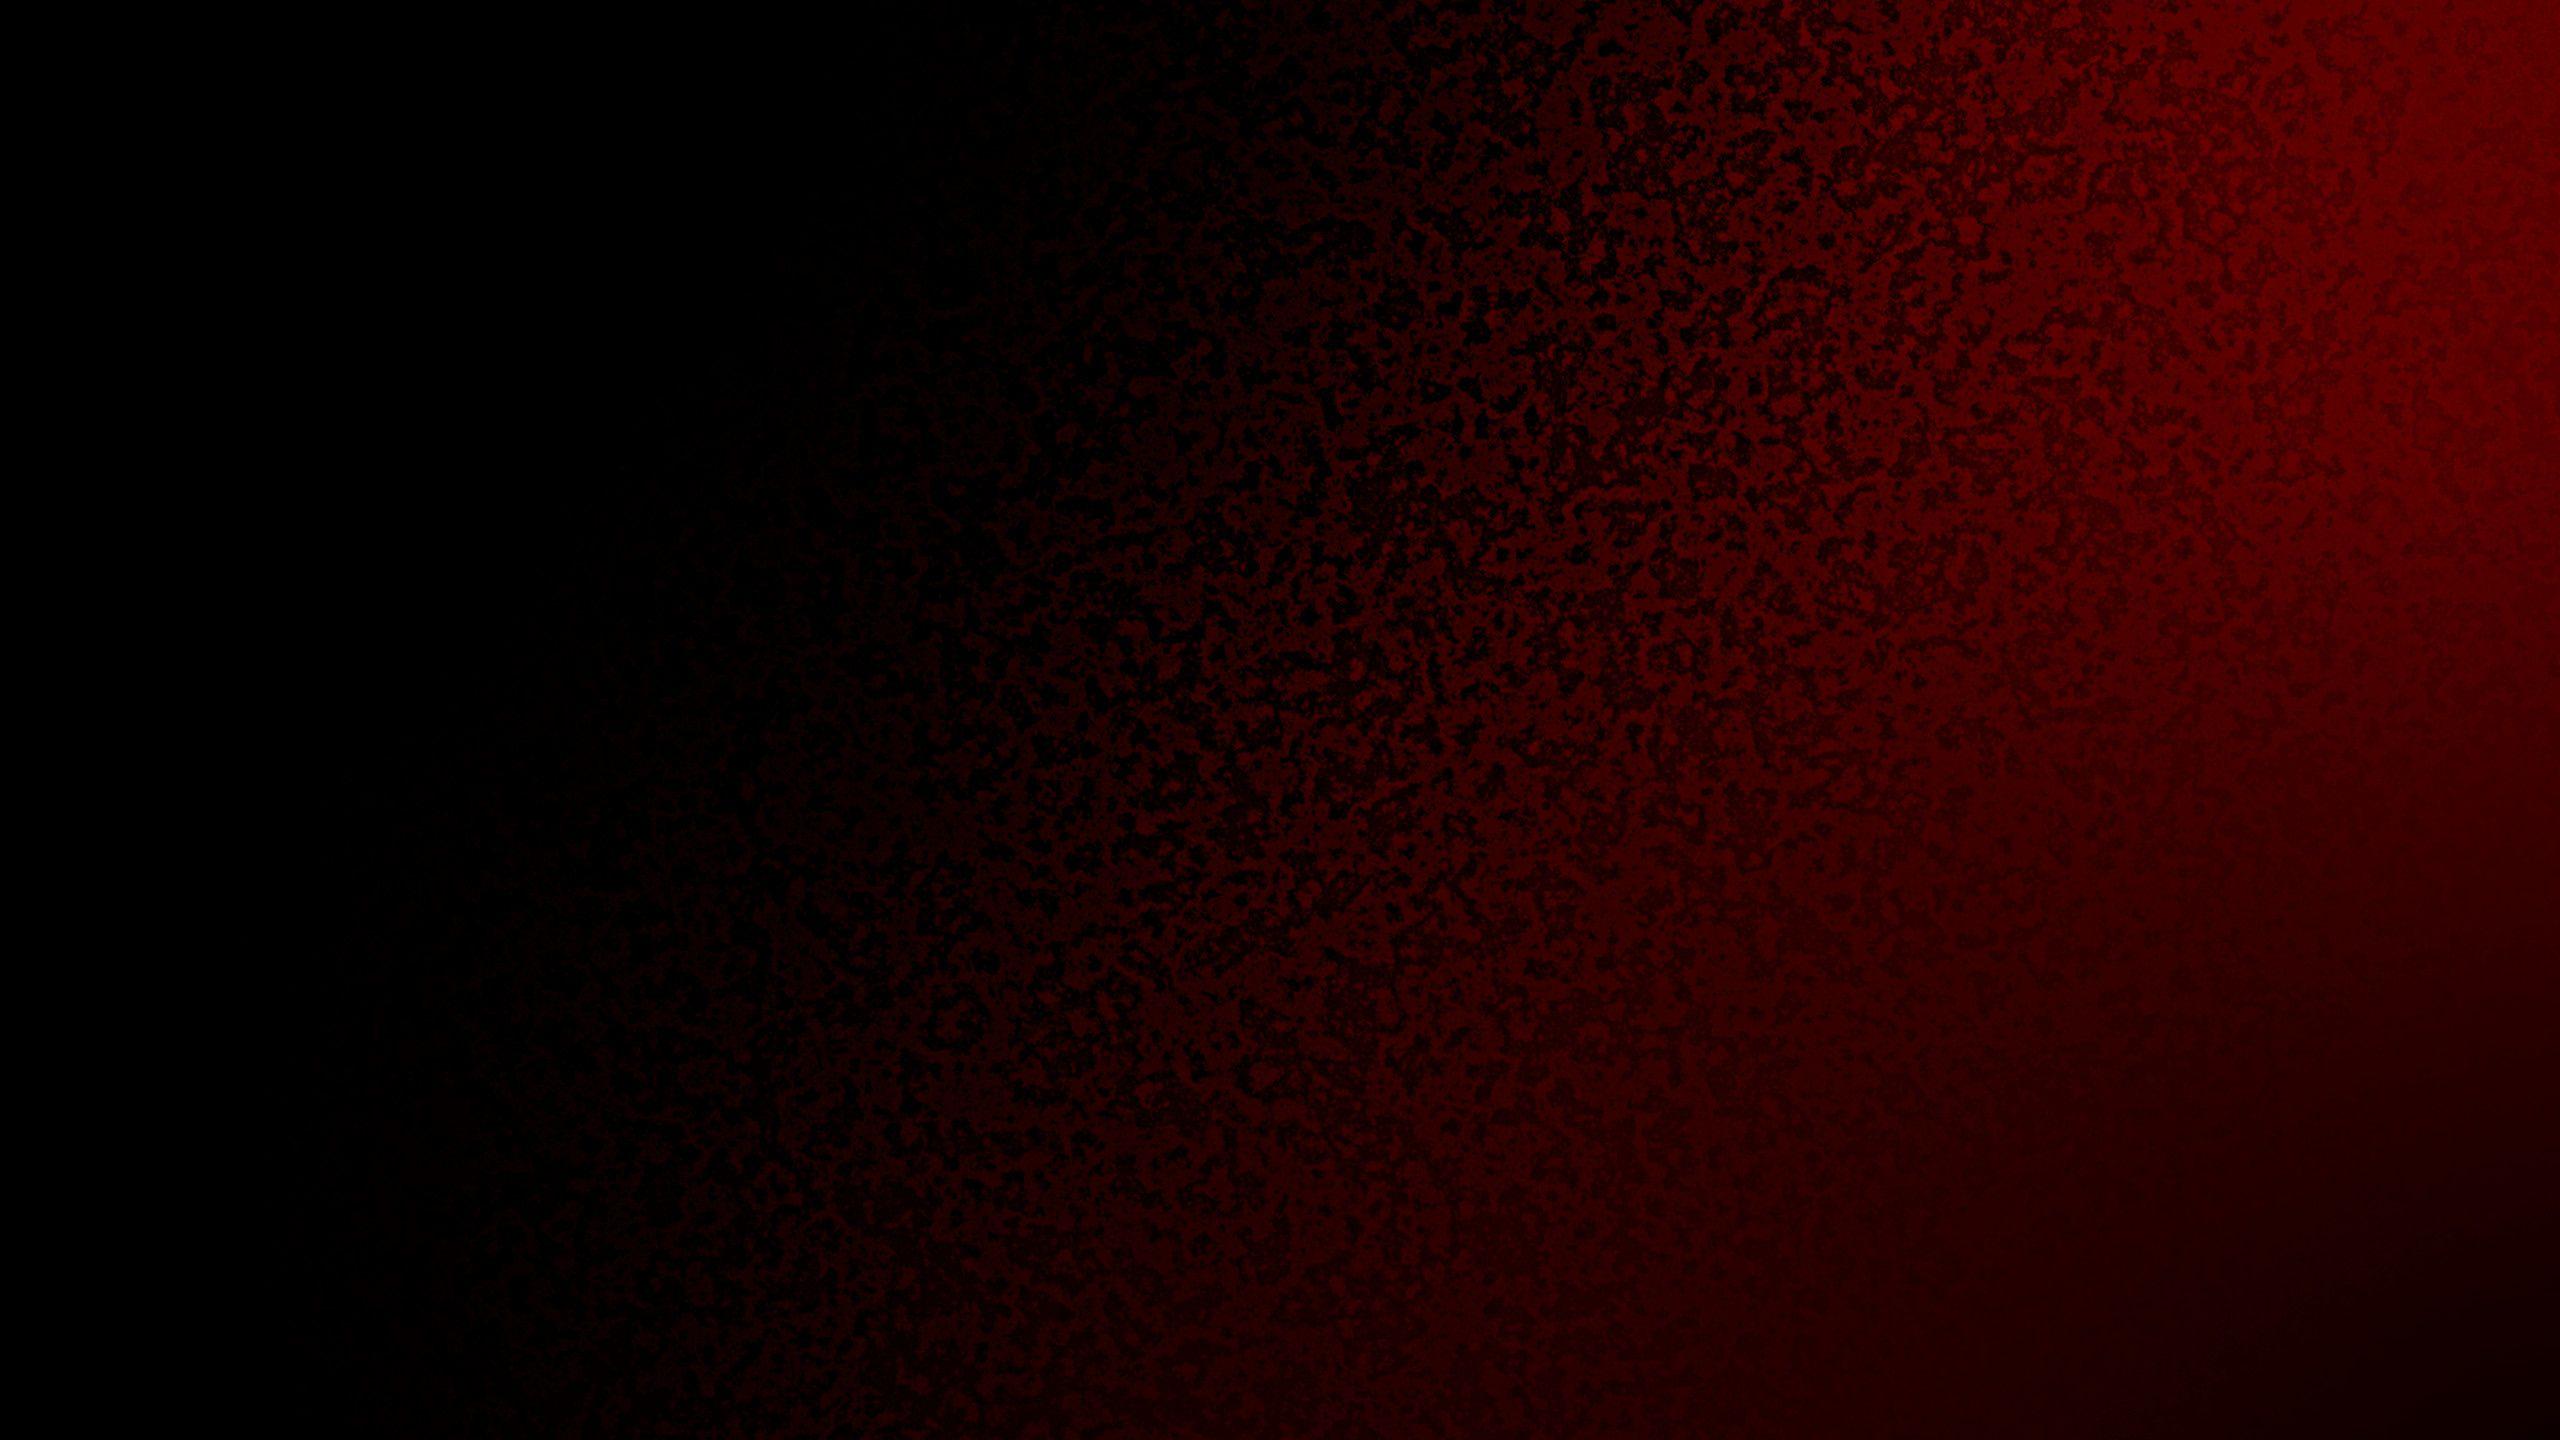 Dark And Red Wallpapers - Wallpaper Cave